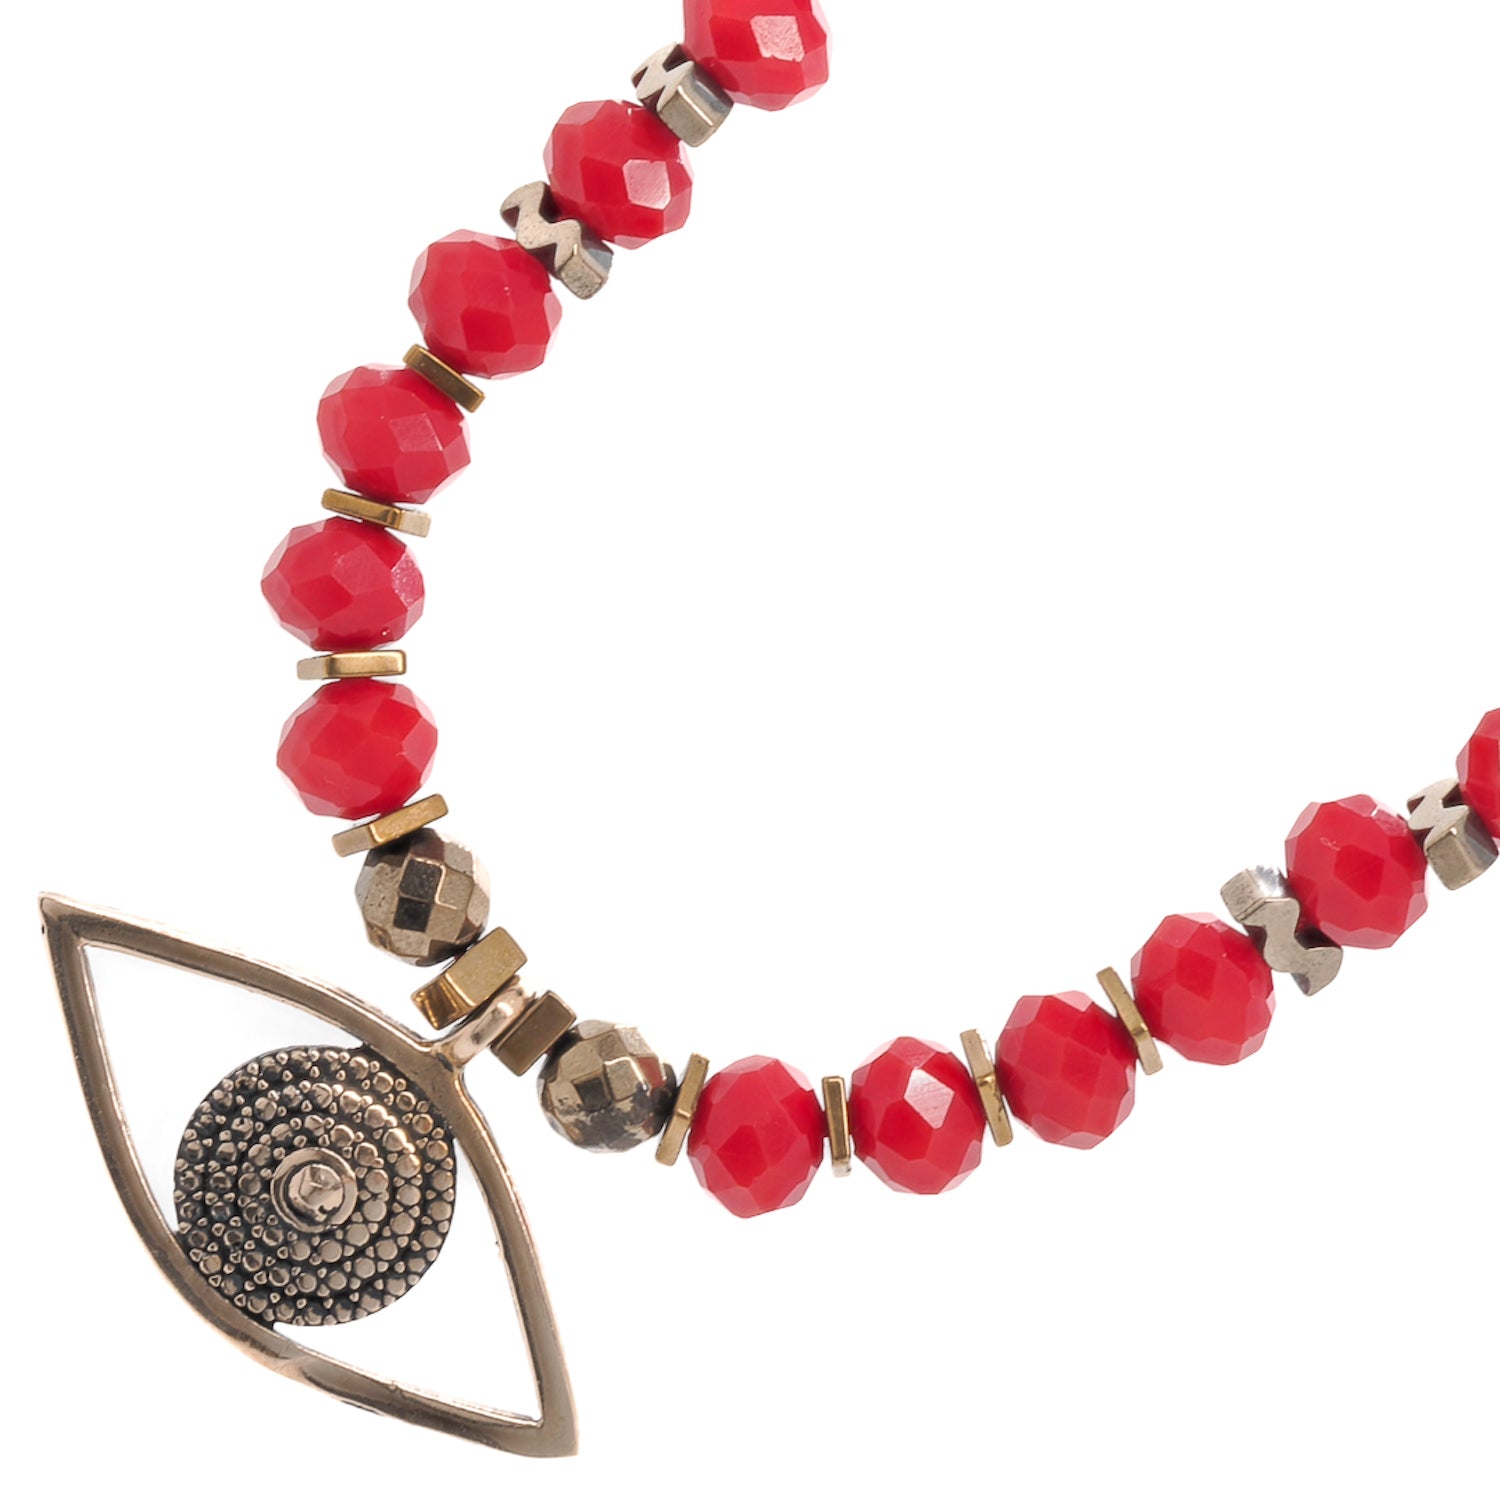 Necklace showcasing the beauty of red crystal beads and a bronze Evil Eye pendant, adding a touch of positivity and protection.